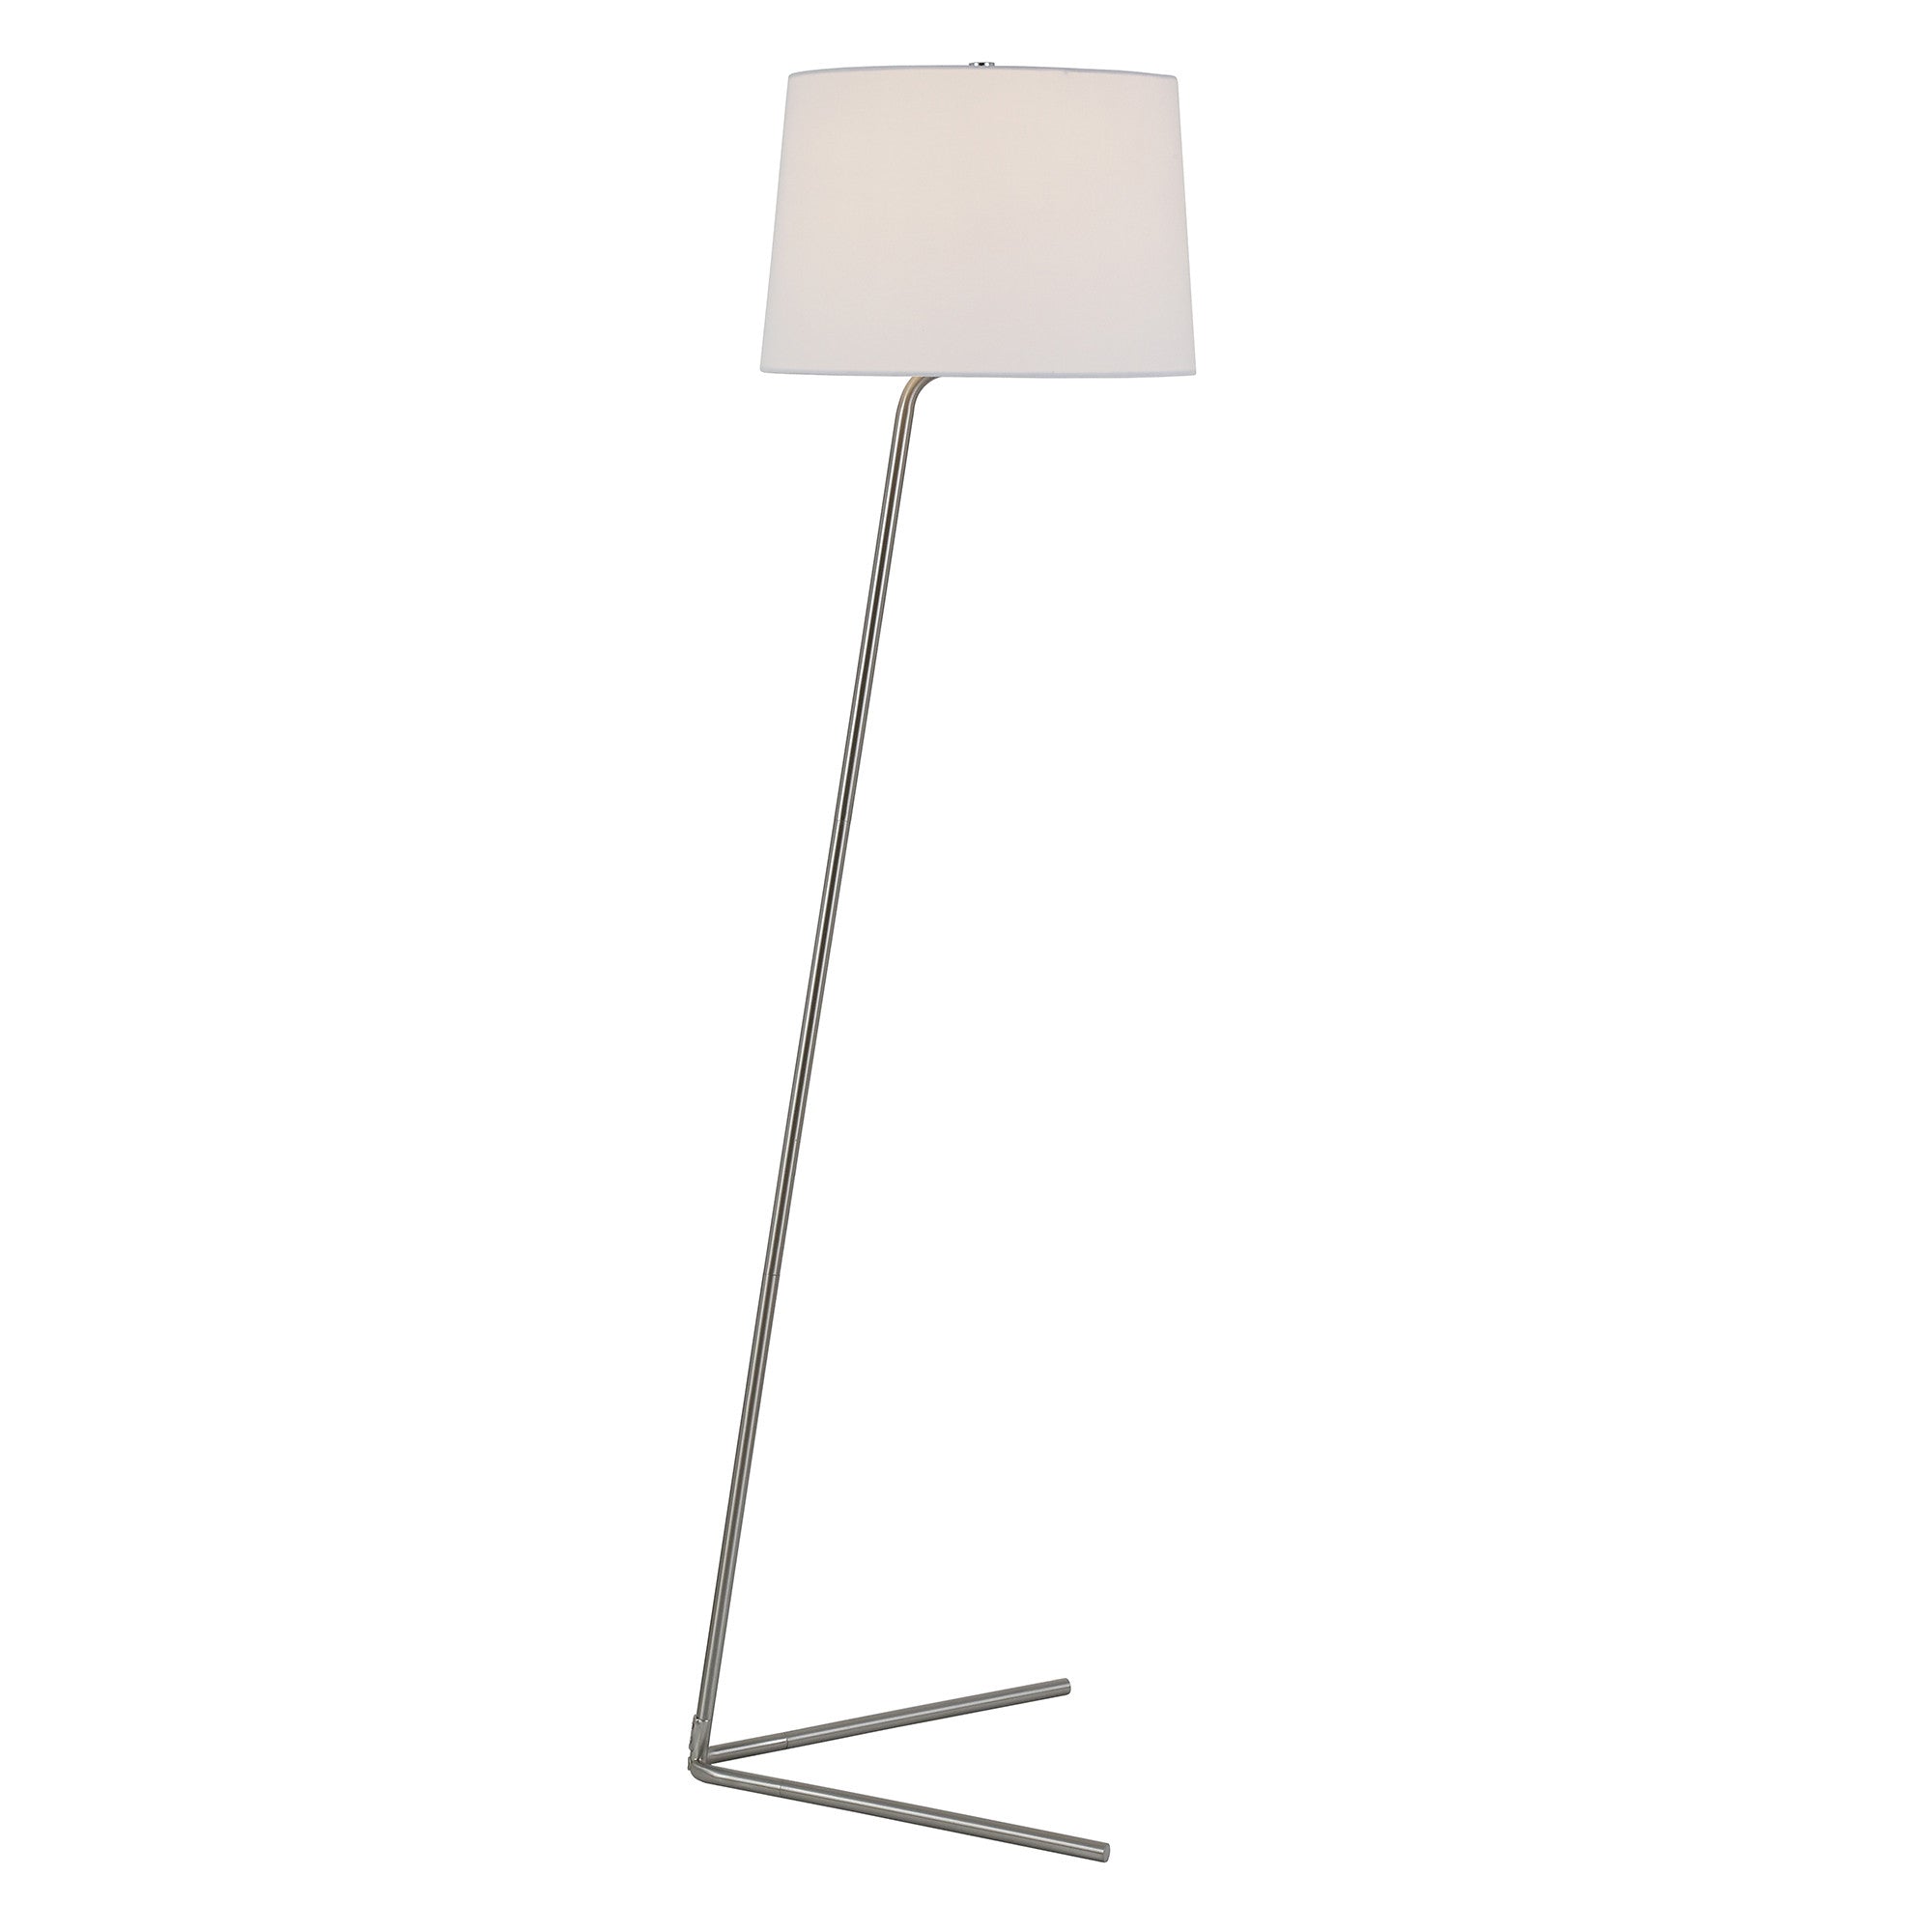 60" Nickel Novelty Floor Lamp With White Frosted Glass Drum Shade